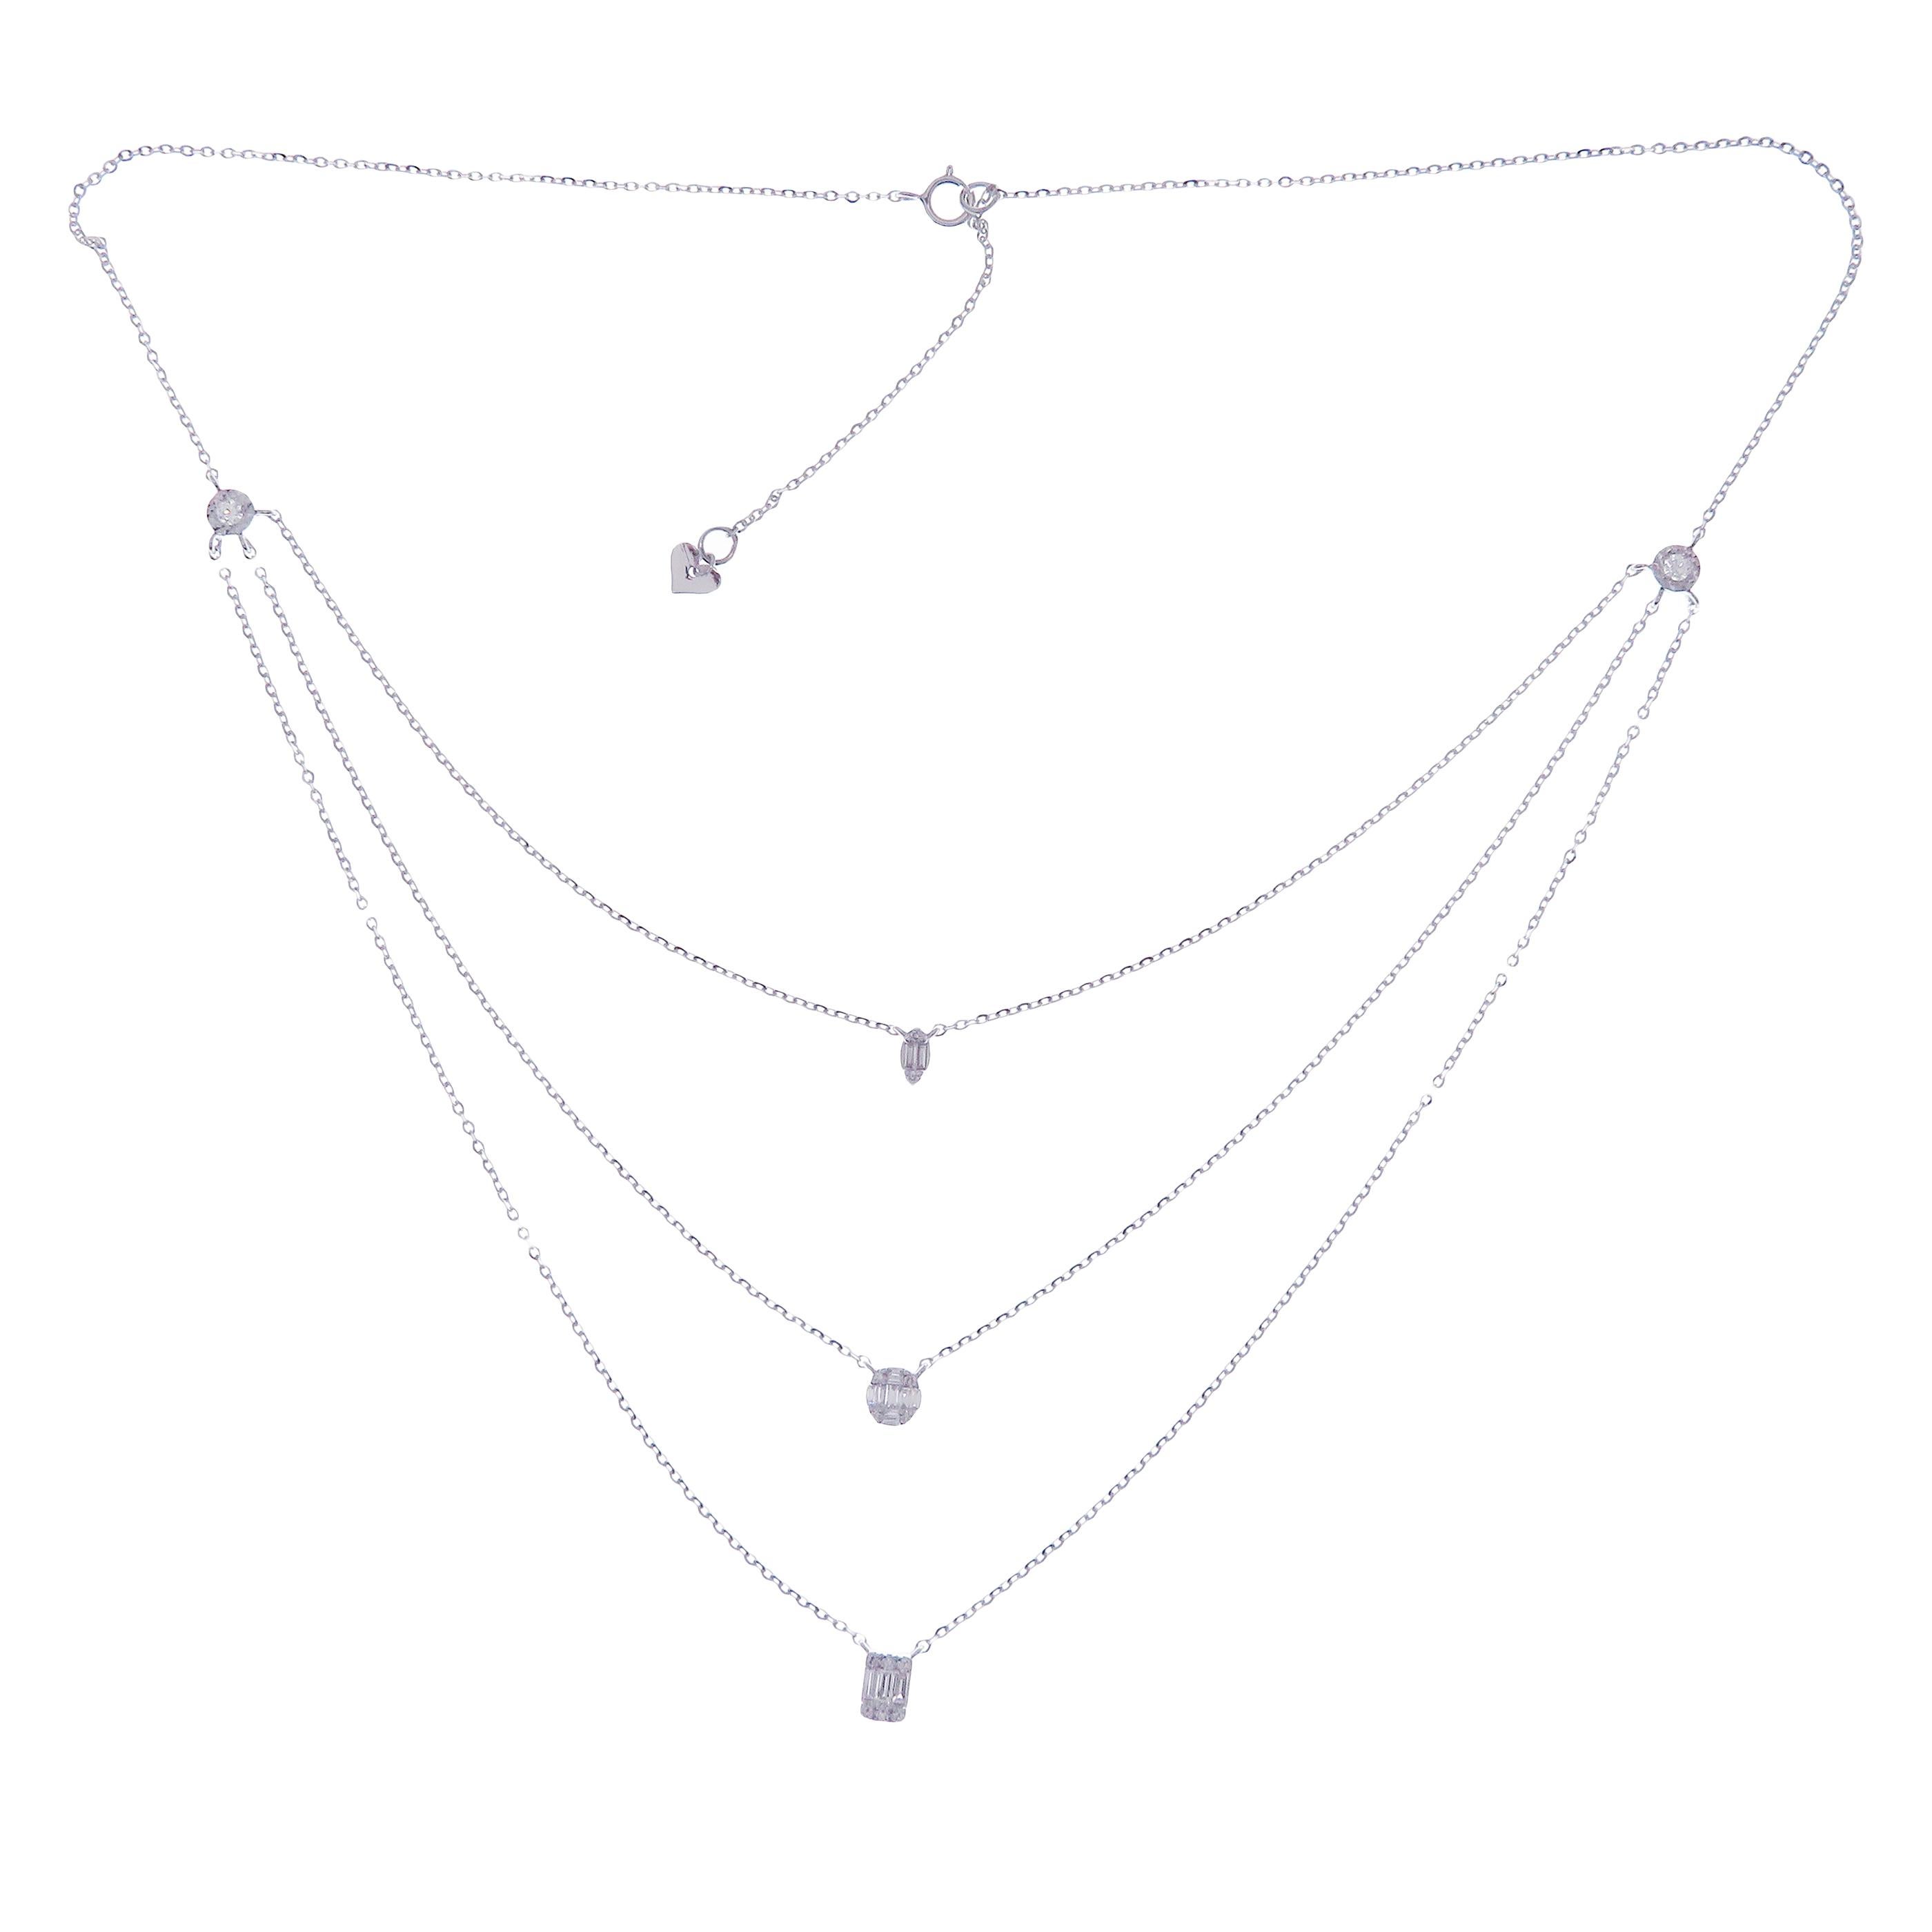 3 layer necklace white gold